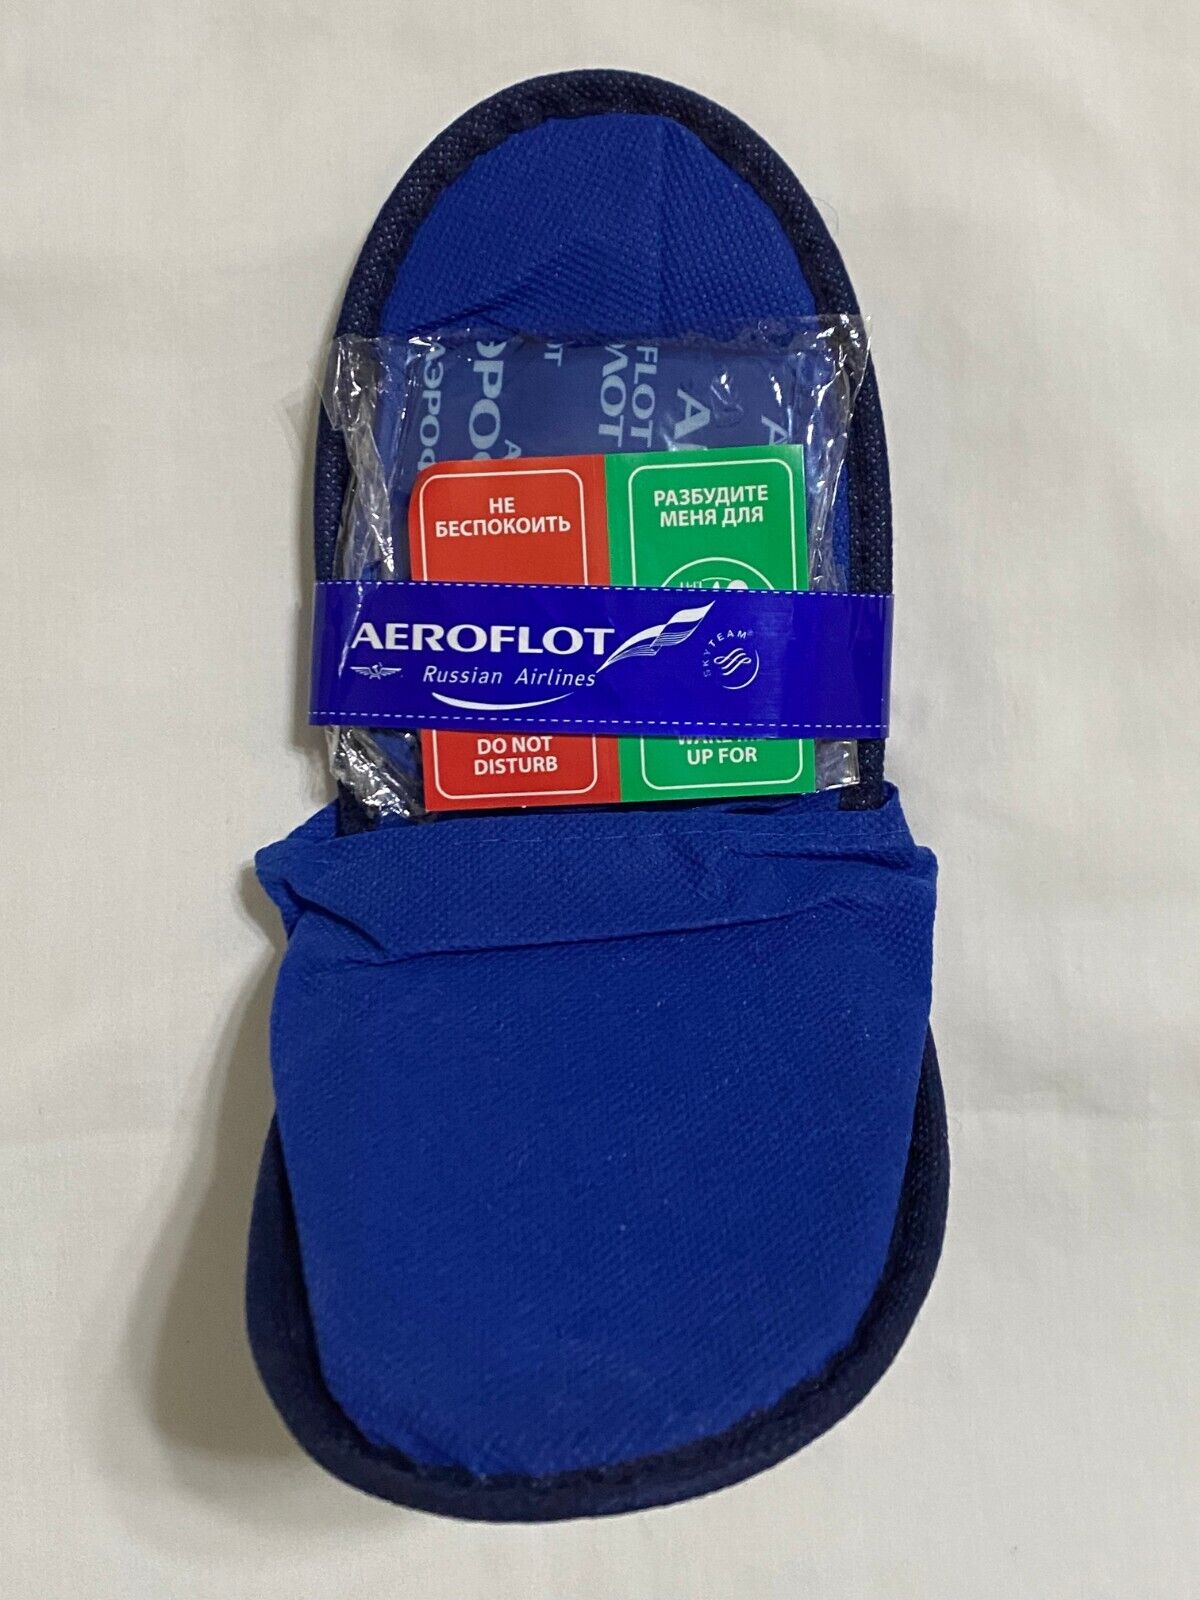 Kit of Aeroflot Russian Airline Travel Slippers Eyemask and Stickers - New